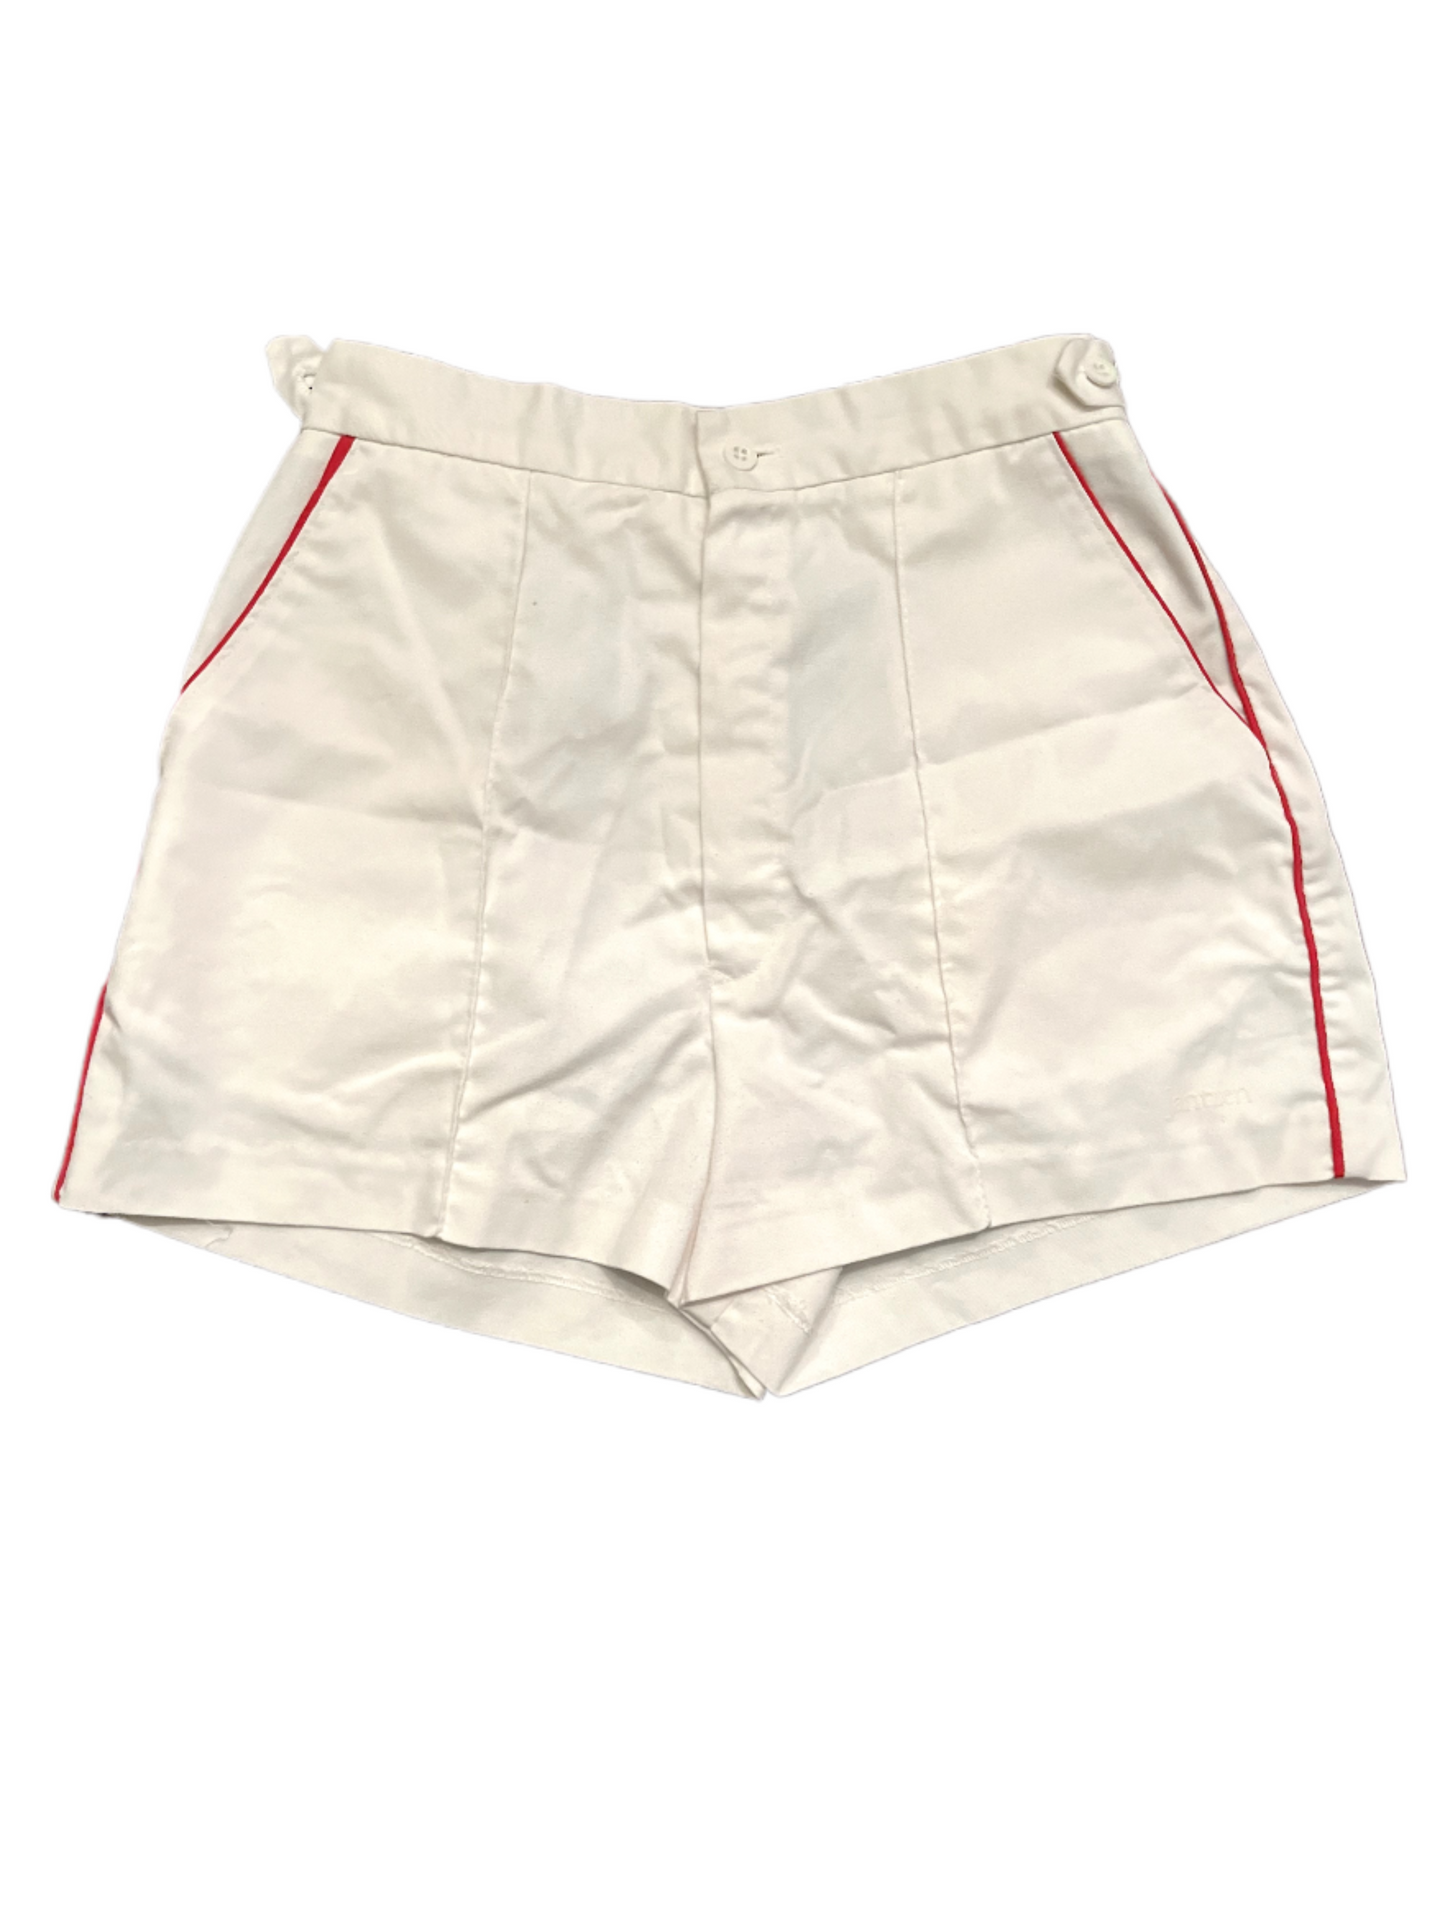 Front of white shorts with red stripe on white background.